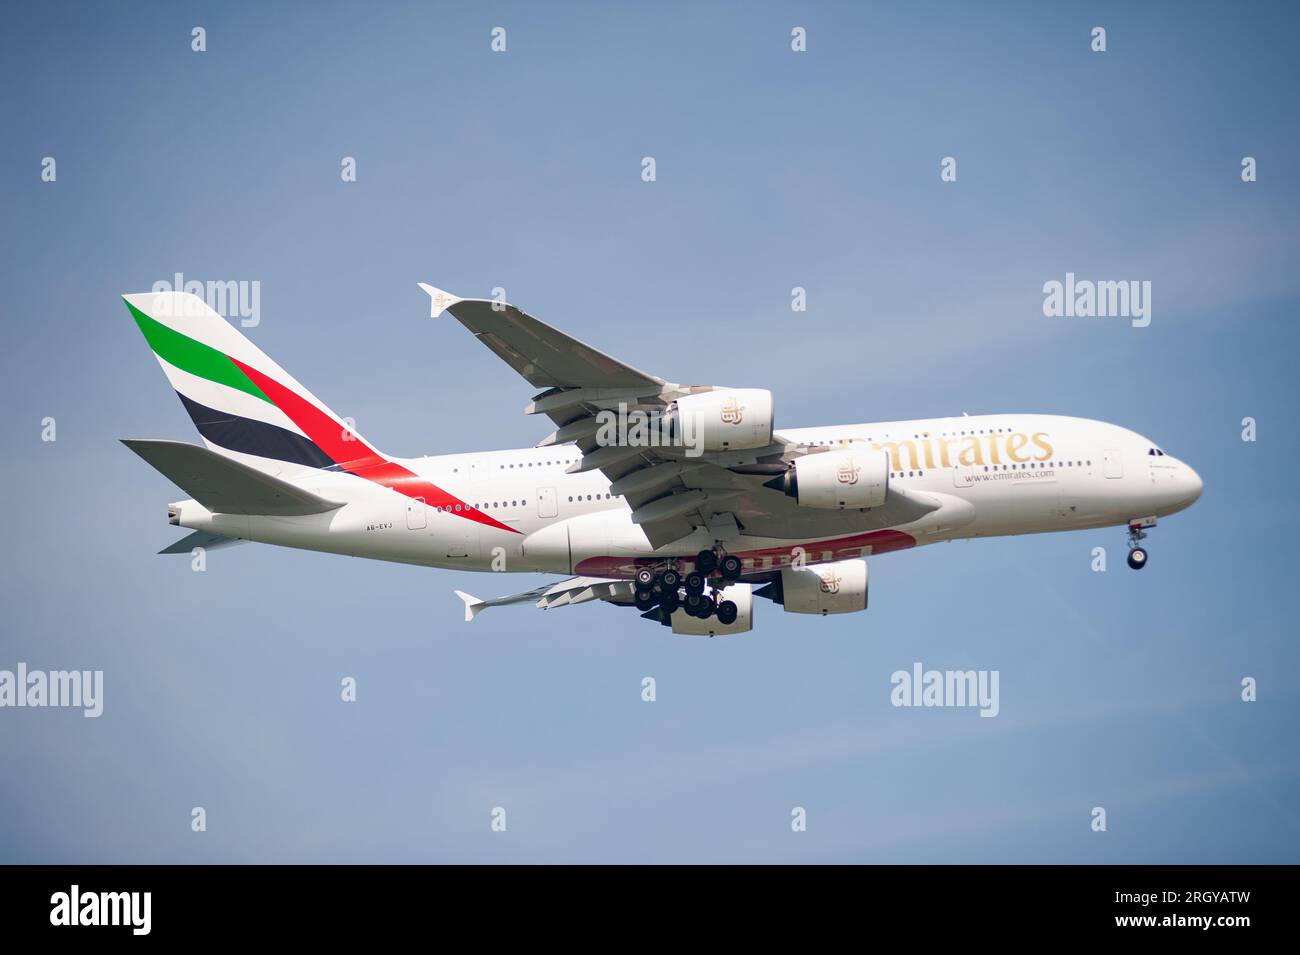 30.07.2023, Singapore, Republic of Singapore, Asia - An Airbus A380-800 passenger aircraft of the Arabian airline Emirates Airline lands at Changi. Stock Photo